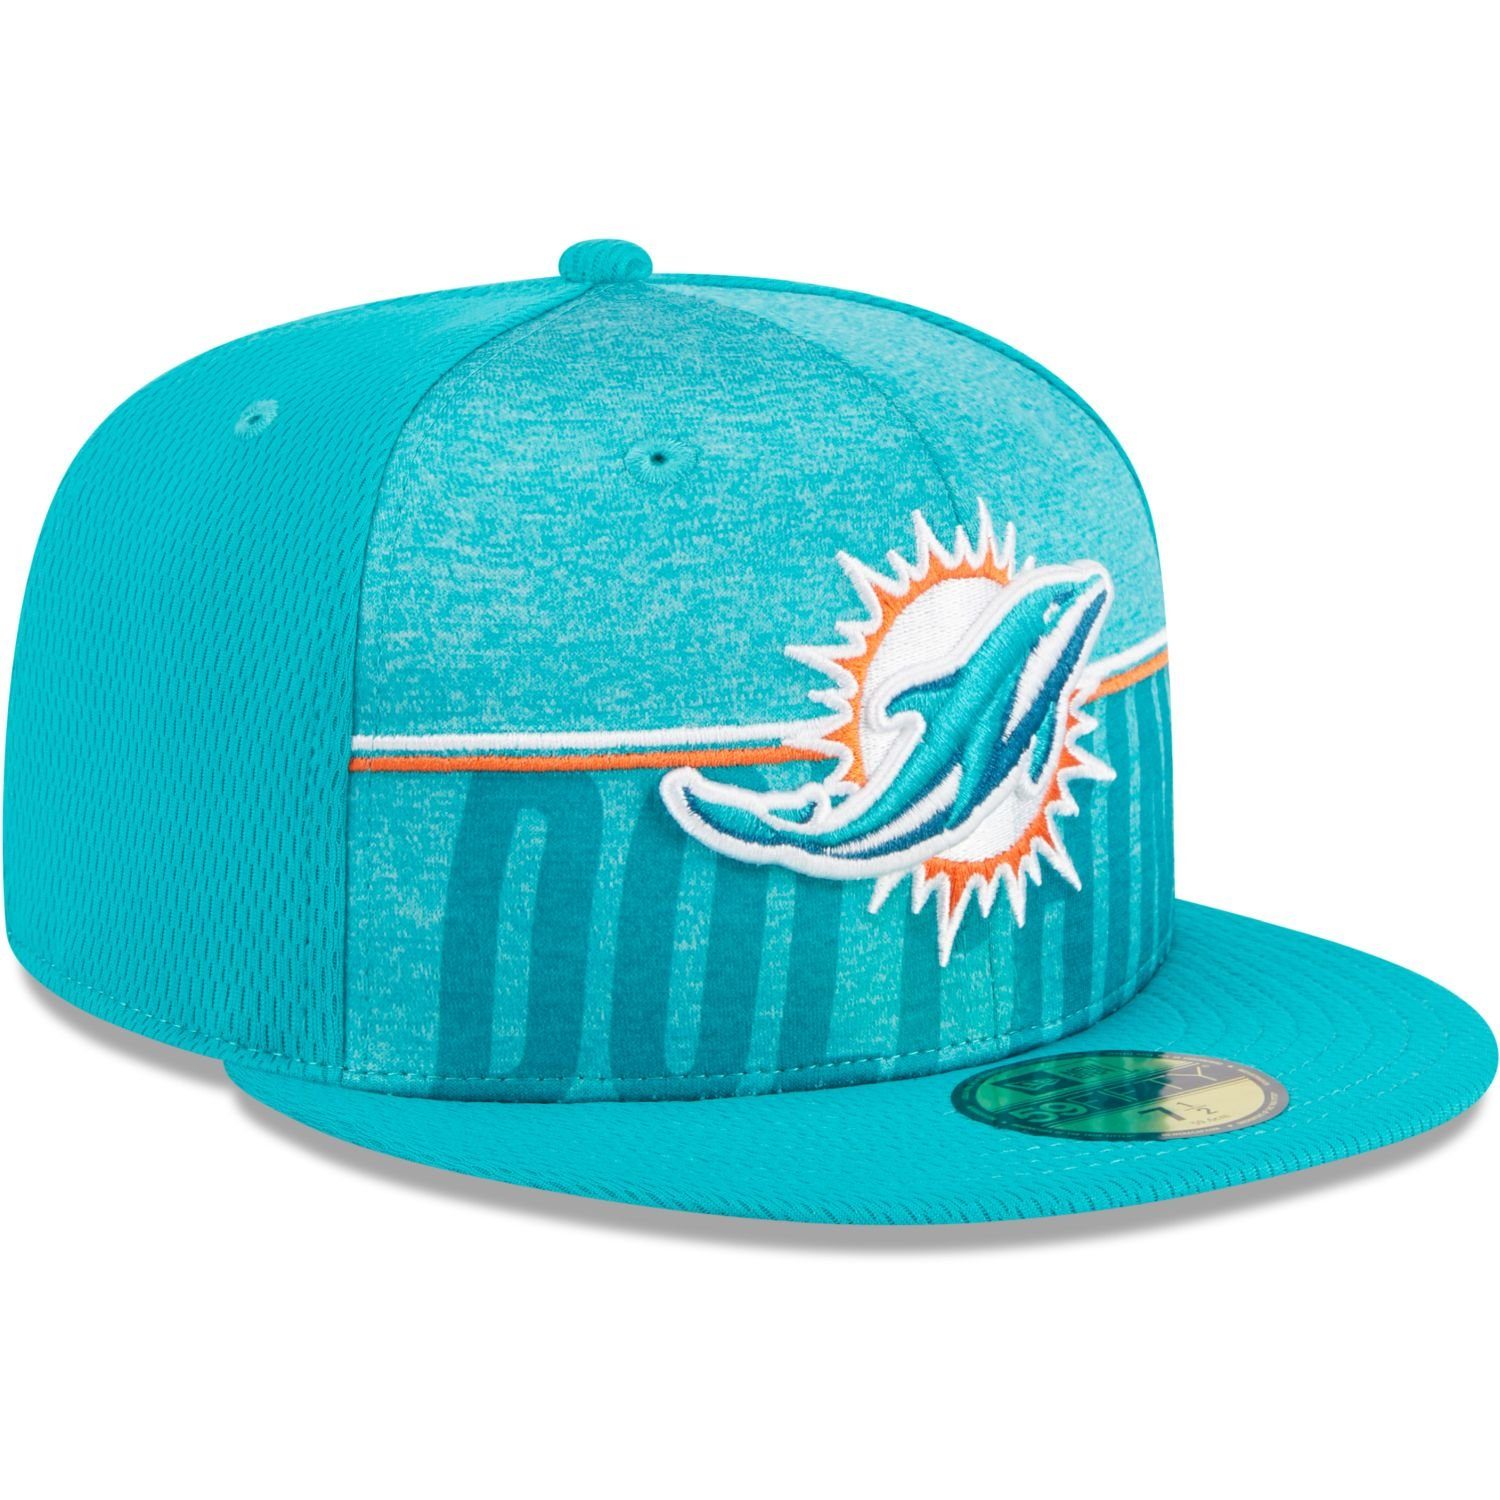 New Dolphins Miami Era Fitted Cap NFL TRAINING 59Fifty